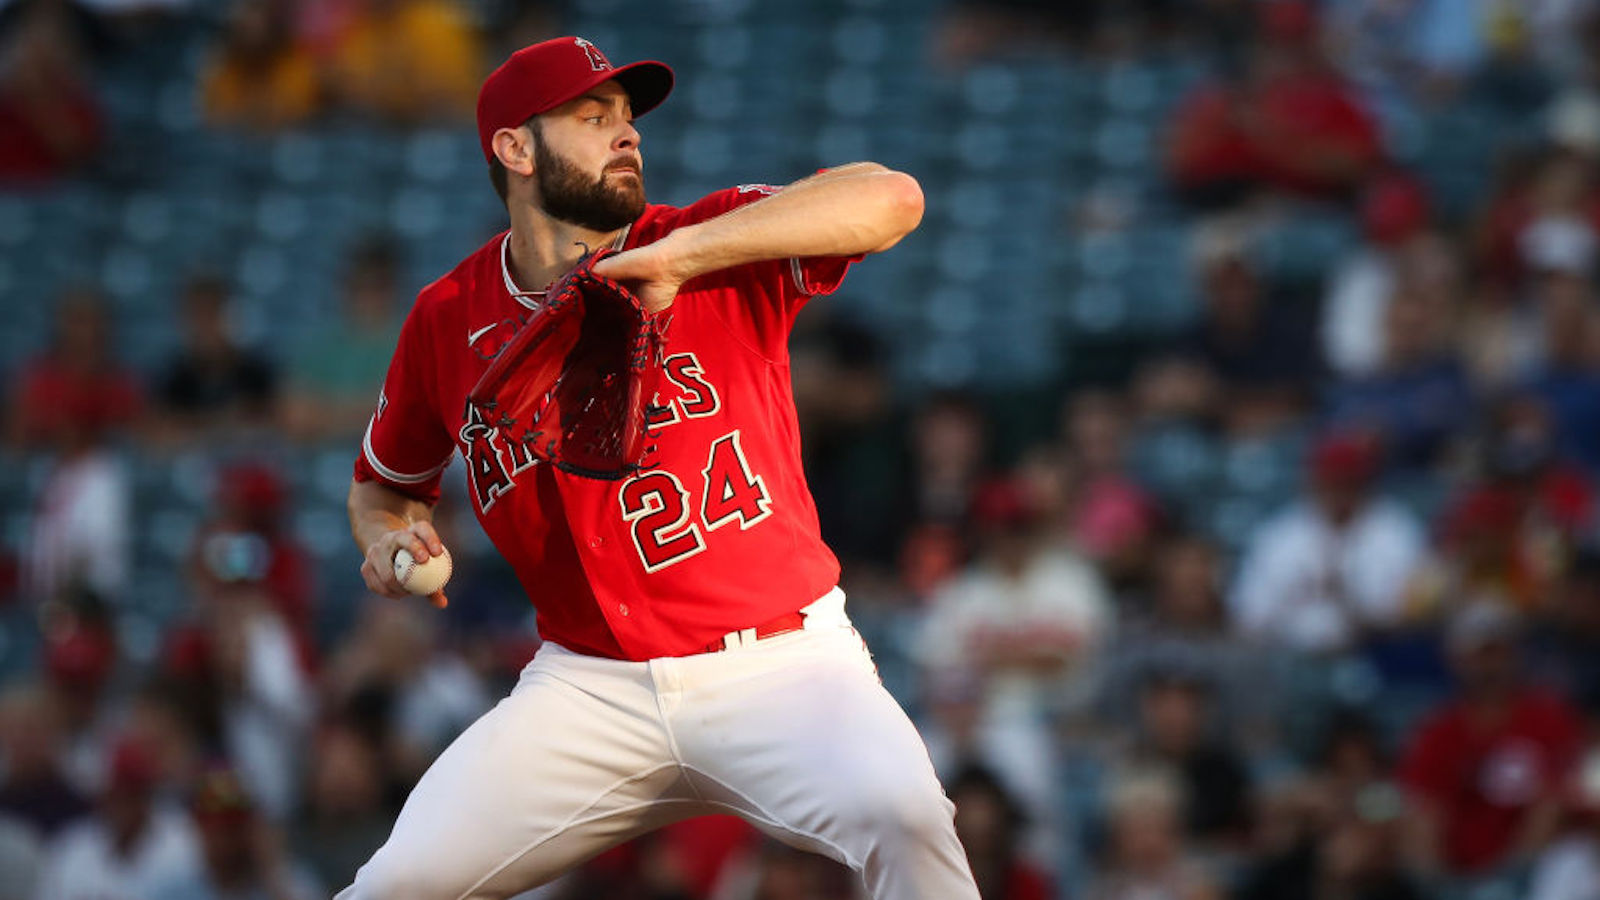 Lucas Giolito #24 of the Los Angeles Angels pitches in the first inning against the Cincinnati Reds at Angel Stadium of Anaheim on August 22, 2023 in Anaheim, California.